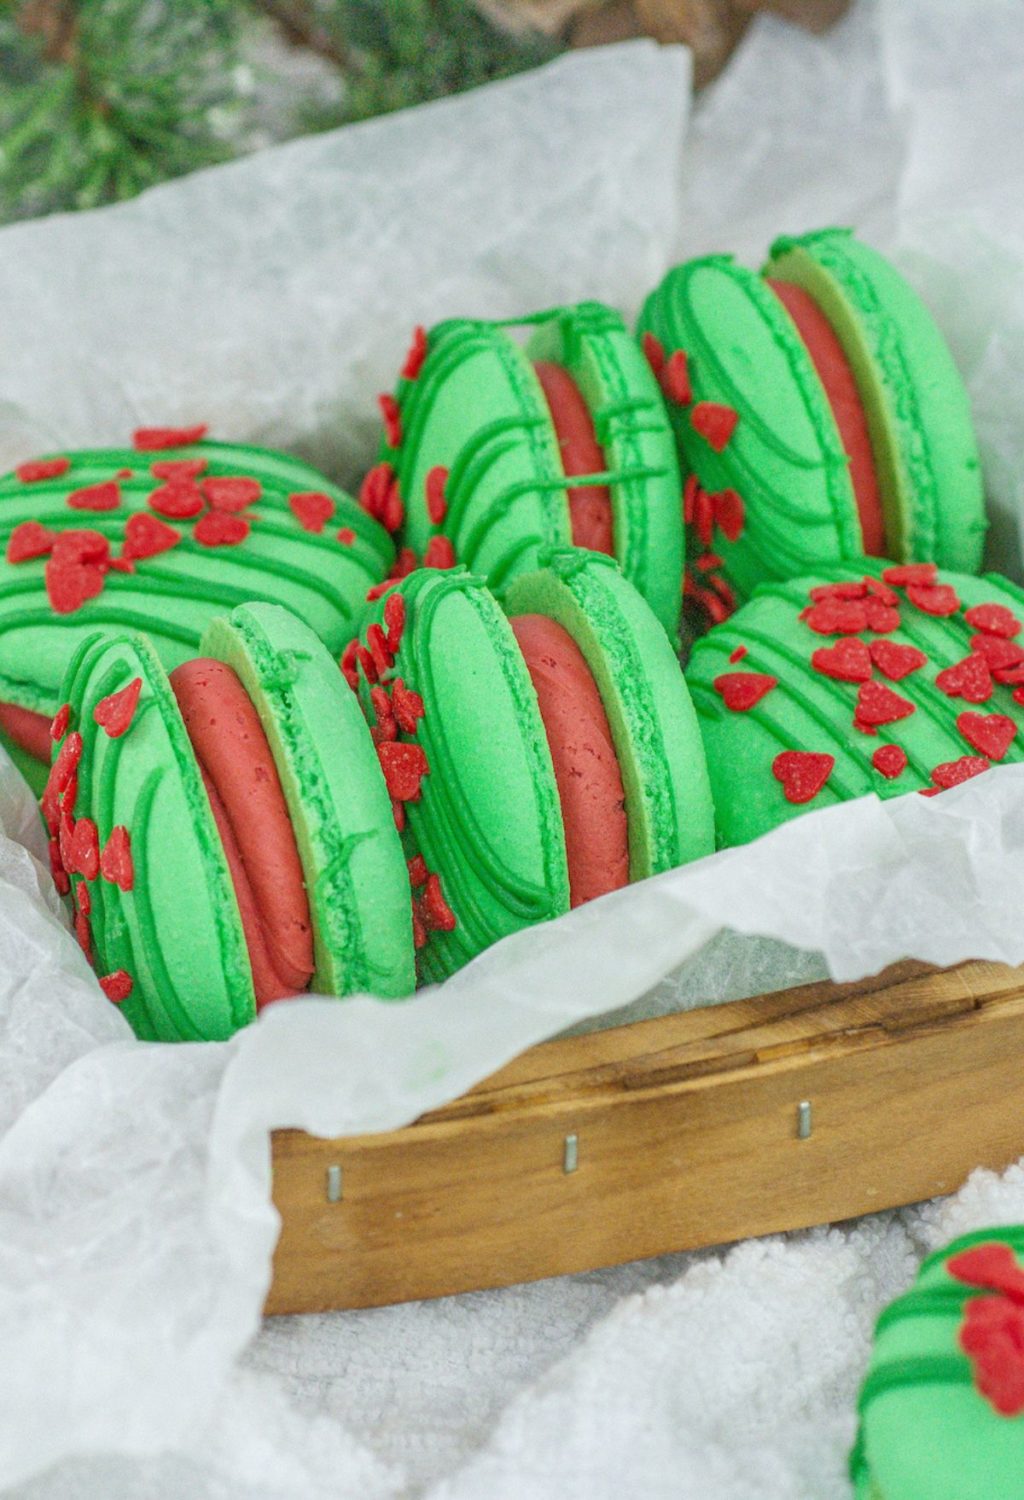 Green and red macarons in a wooden basket.